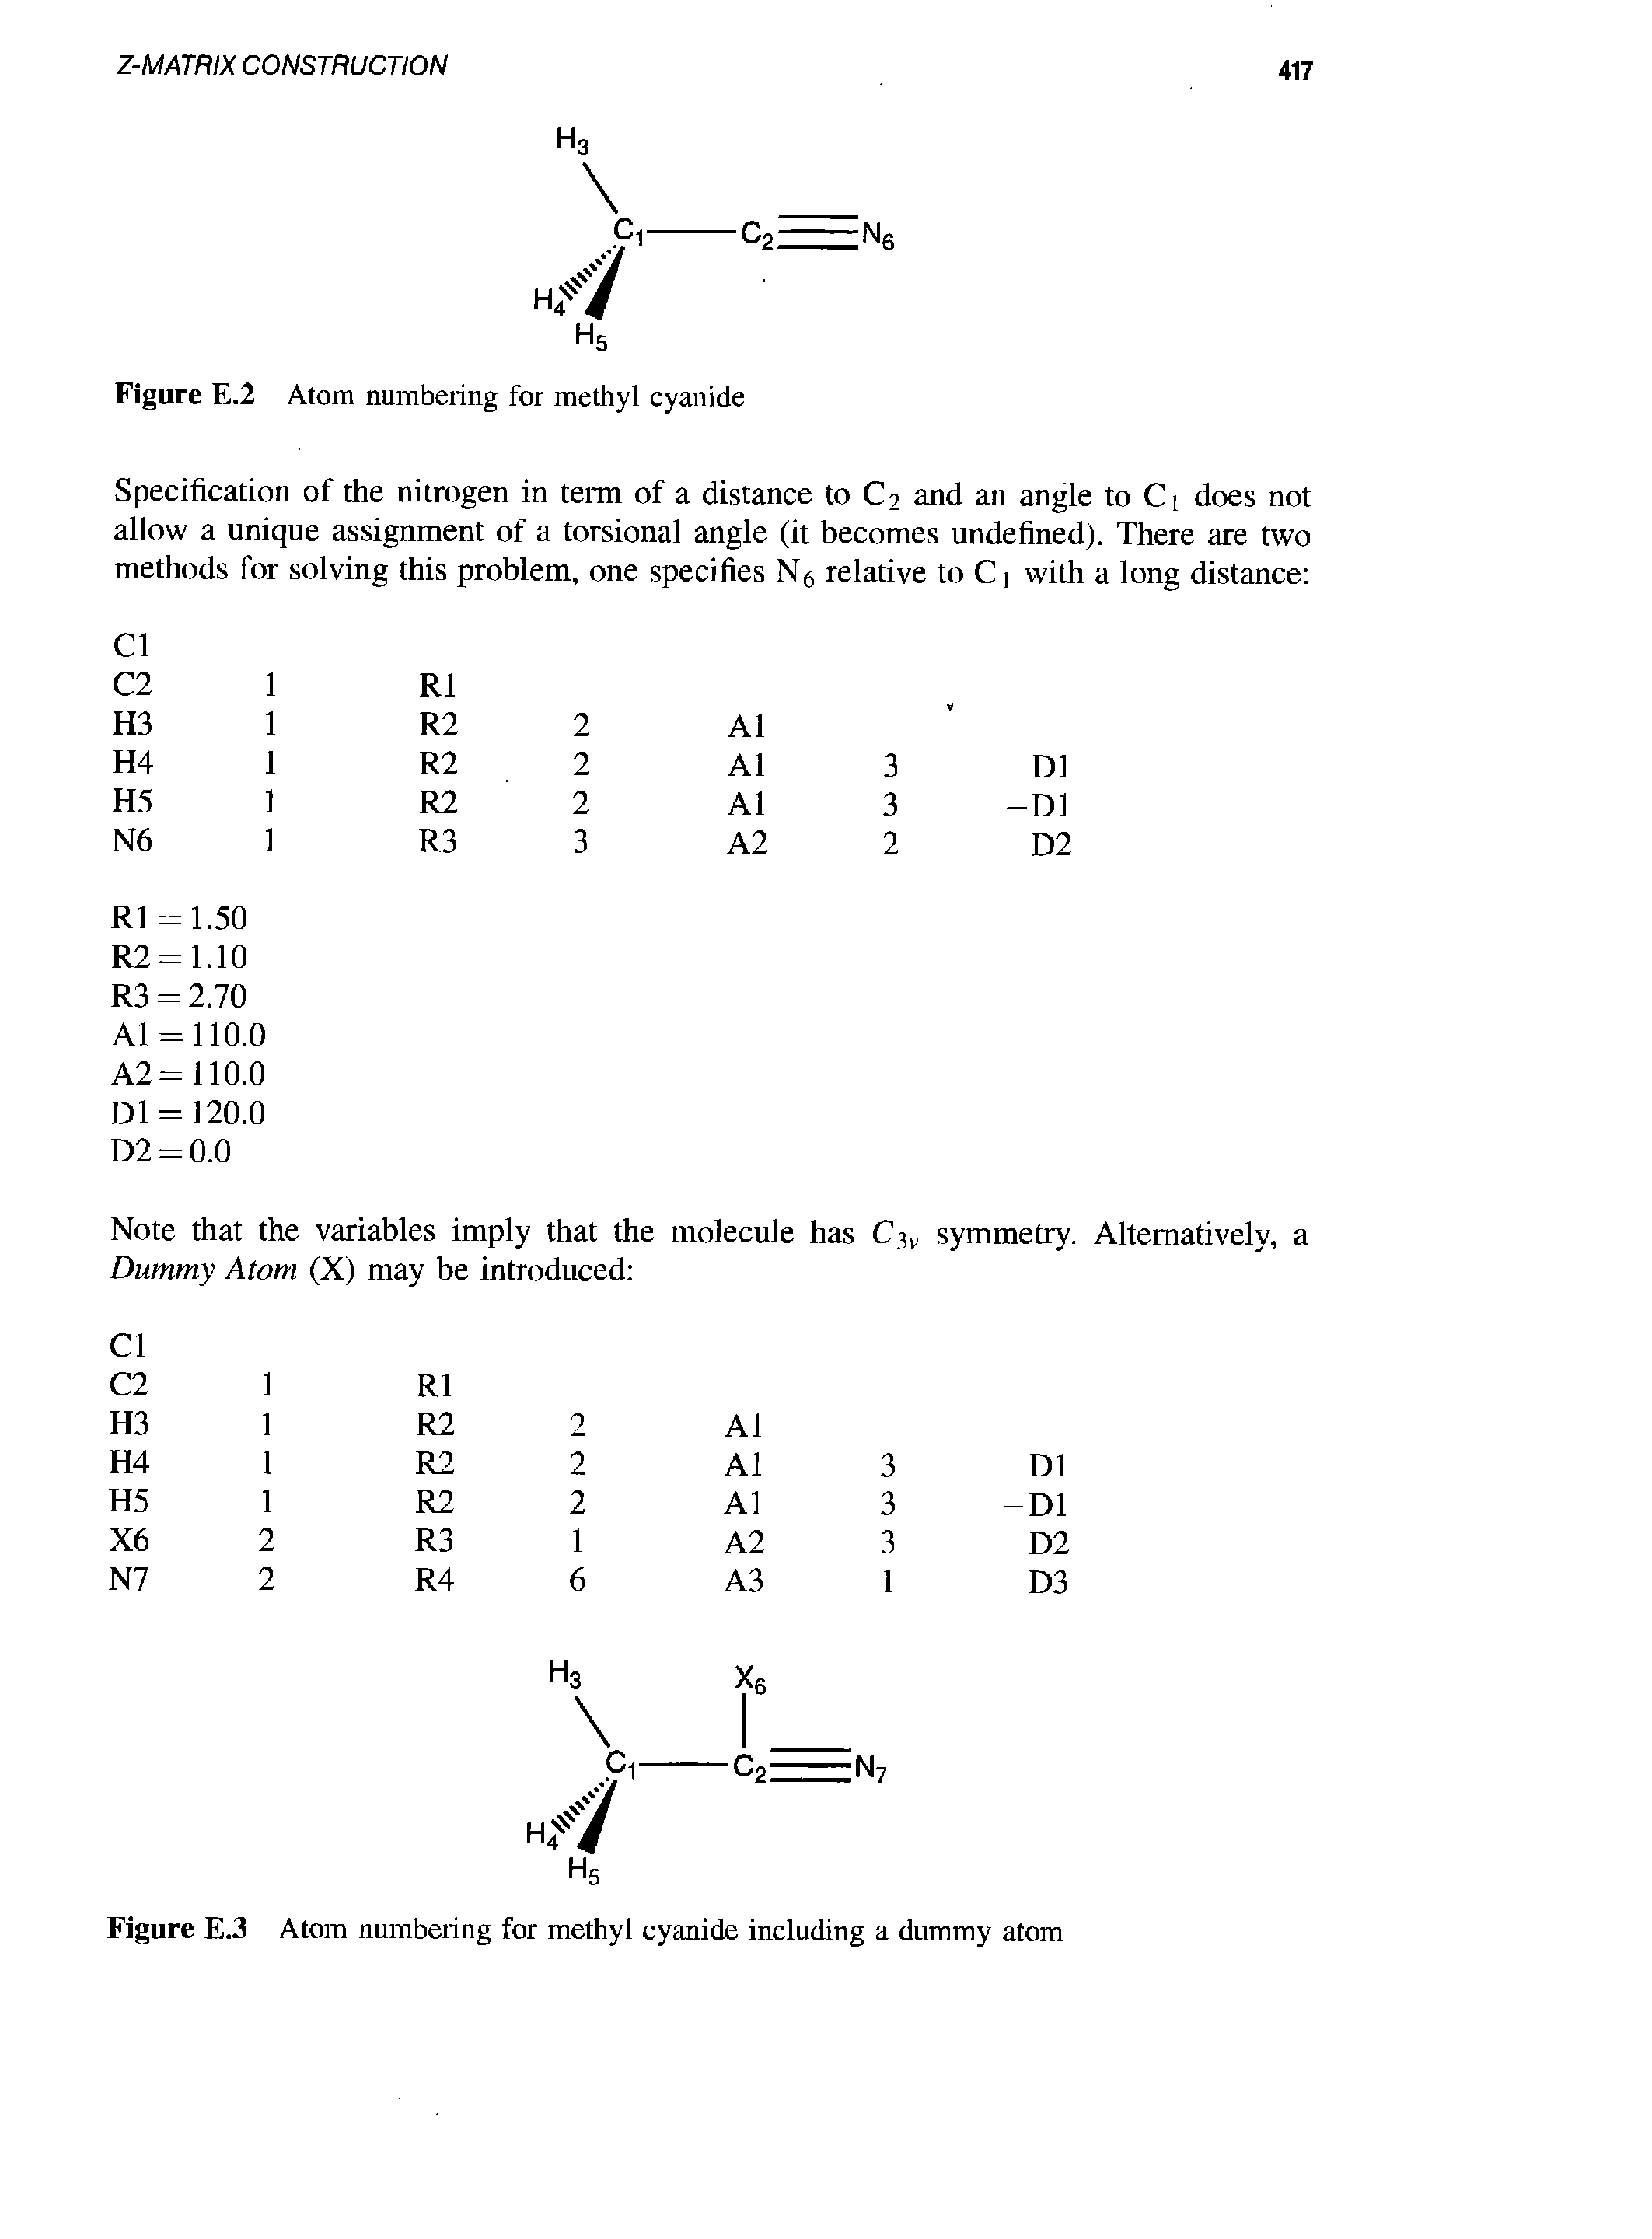 Figure E.3 Atom numbering for methyl cyanide including a dummy atom...